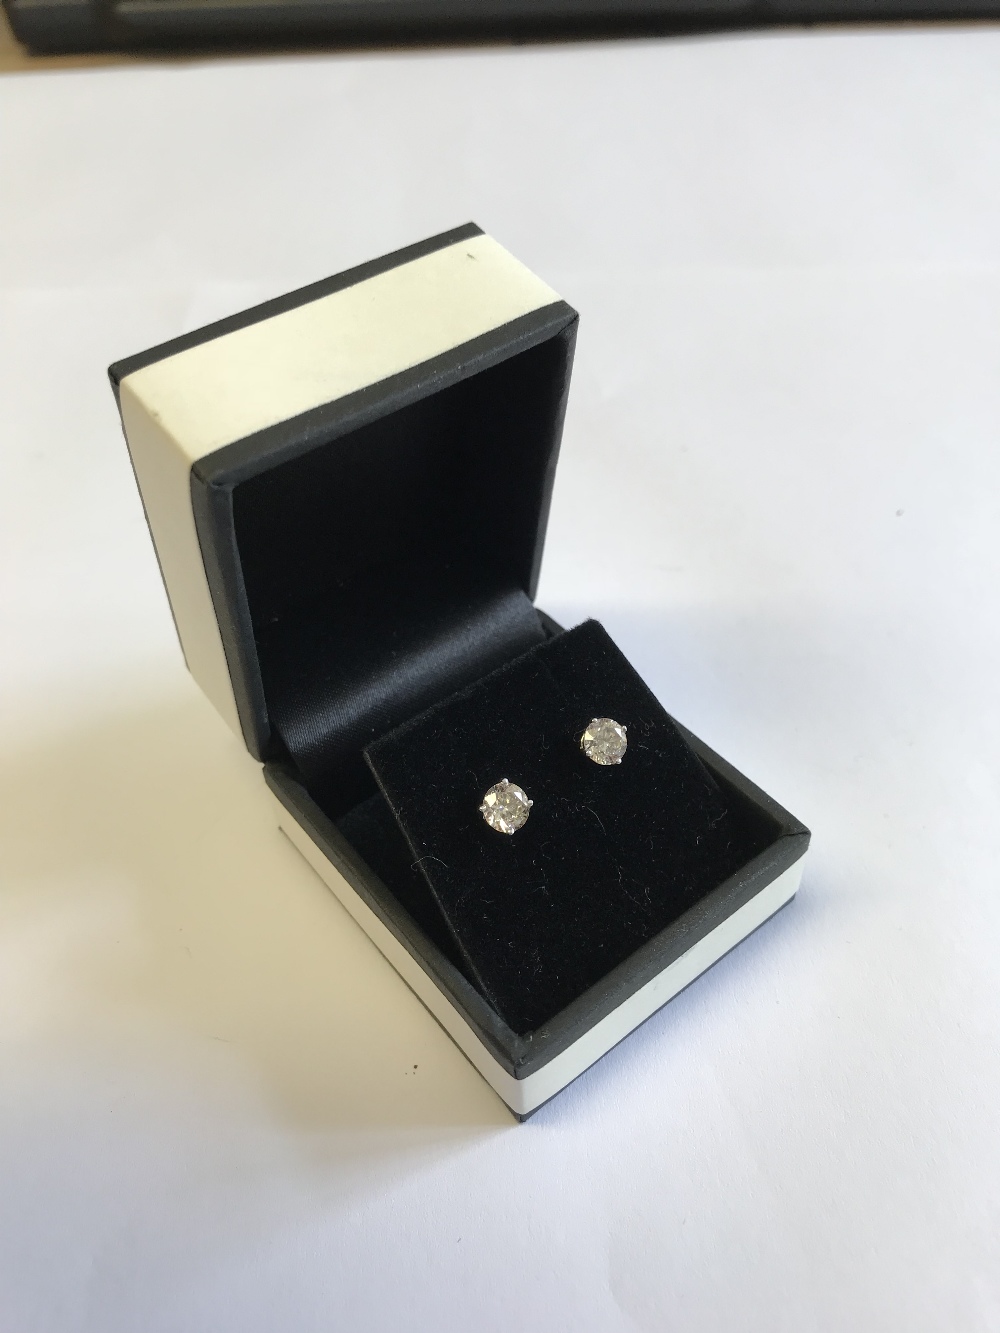 Pair of 14 carat white gold & diamond stud earrings of 1.5 carats approx. - Image 2 of 2